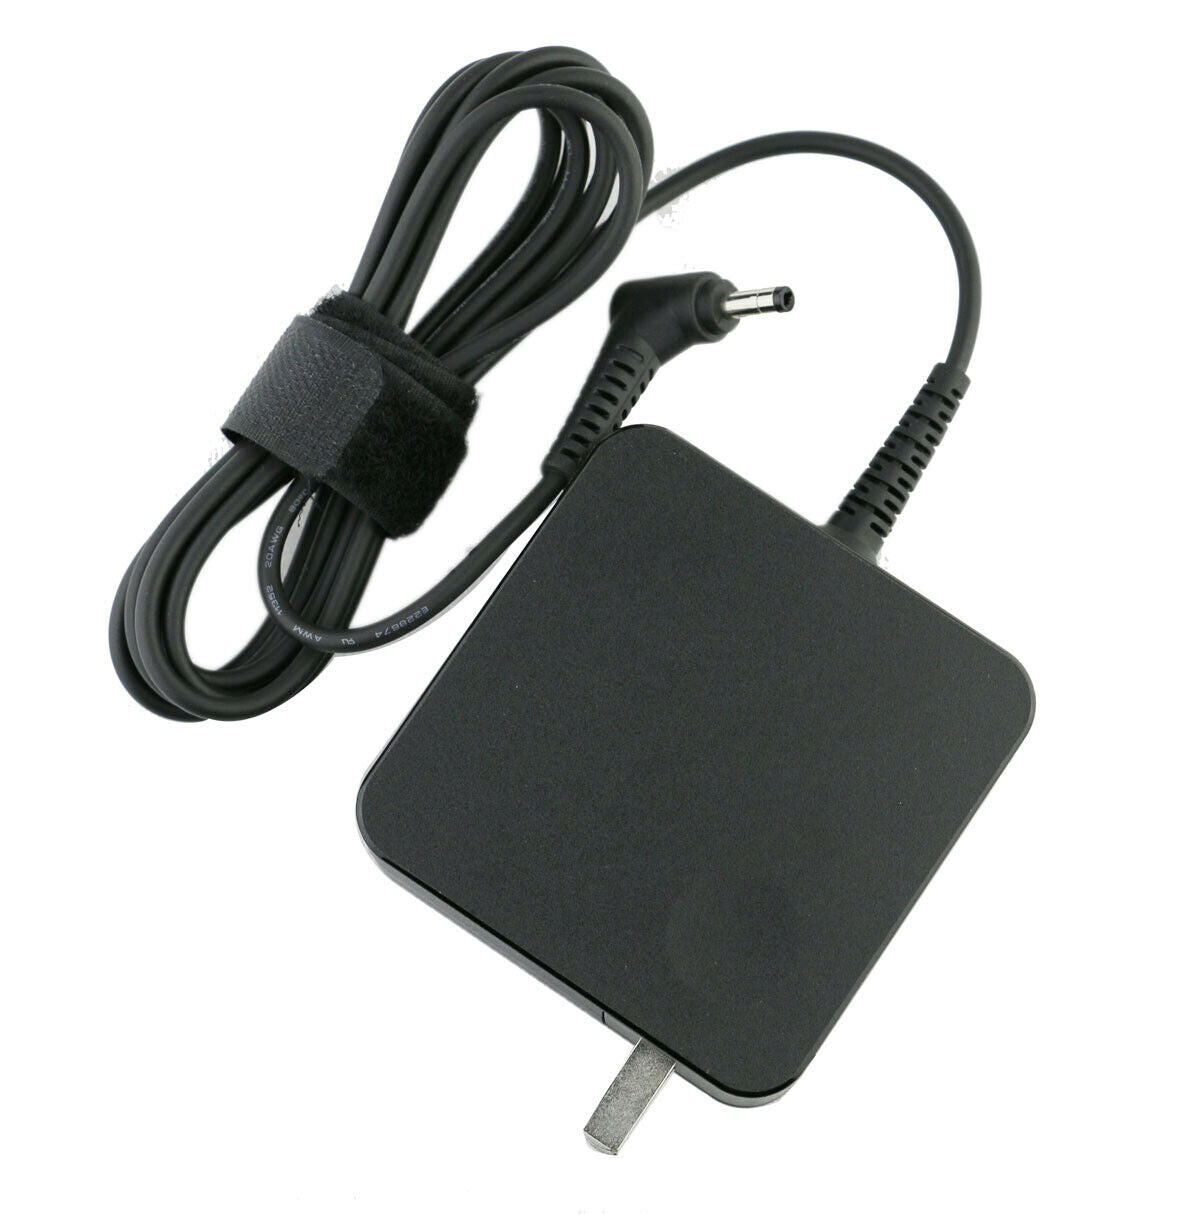 NEW 20V 3.25A 65W US AC Adapter Charger For Lenovo IdeaPad 3 81WE00ENUS 81W0003QUS